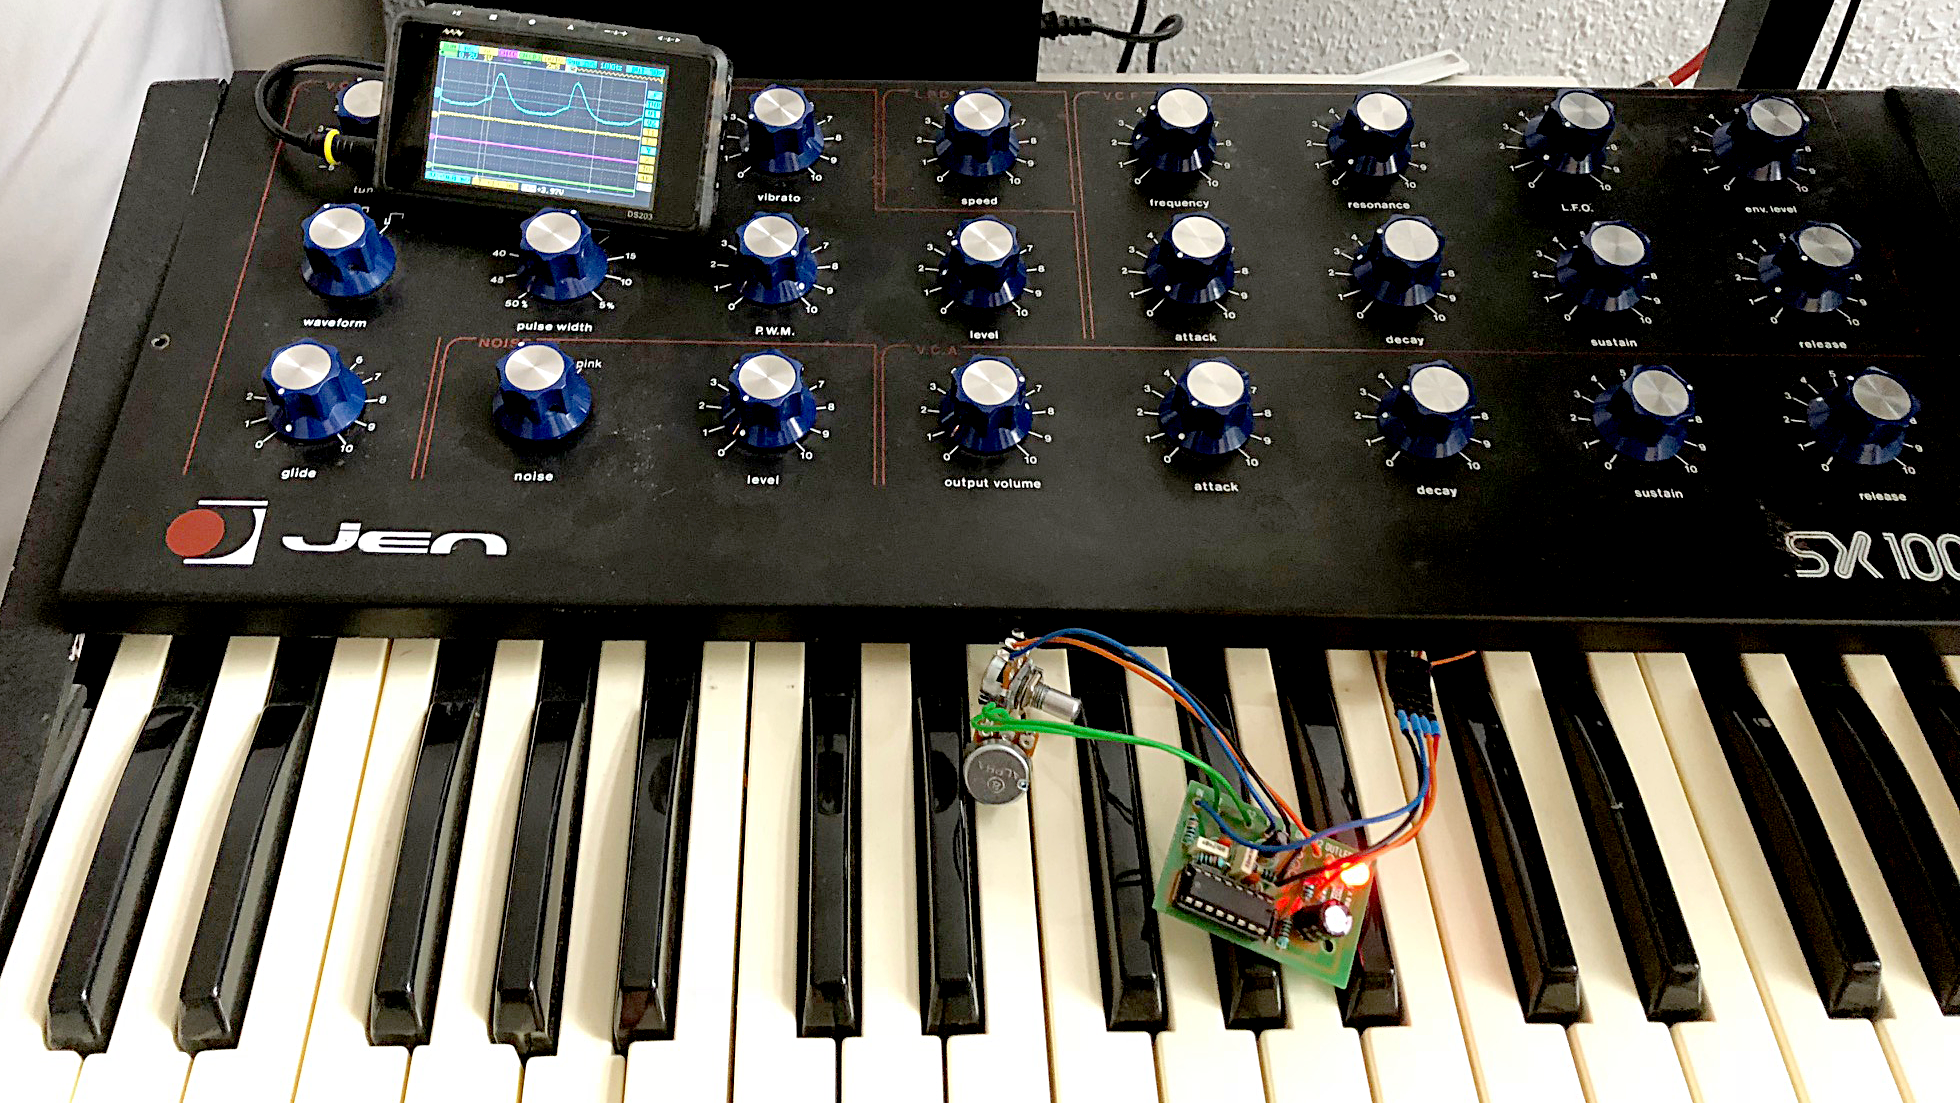 JEN synth, with osc screen displaying a distorted sawtooth wave, and the overdrive circuit lying naked on the keyboard